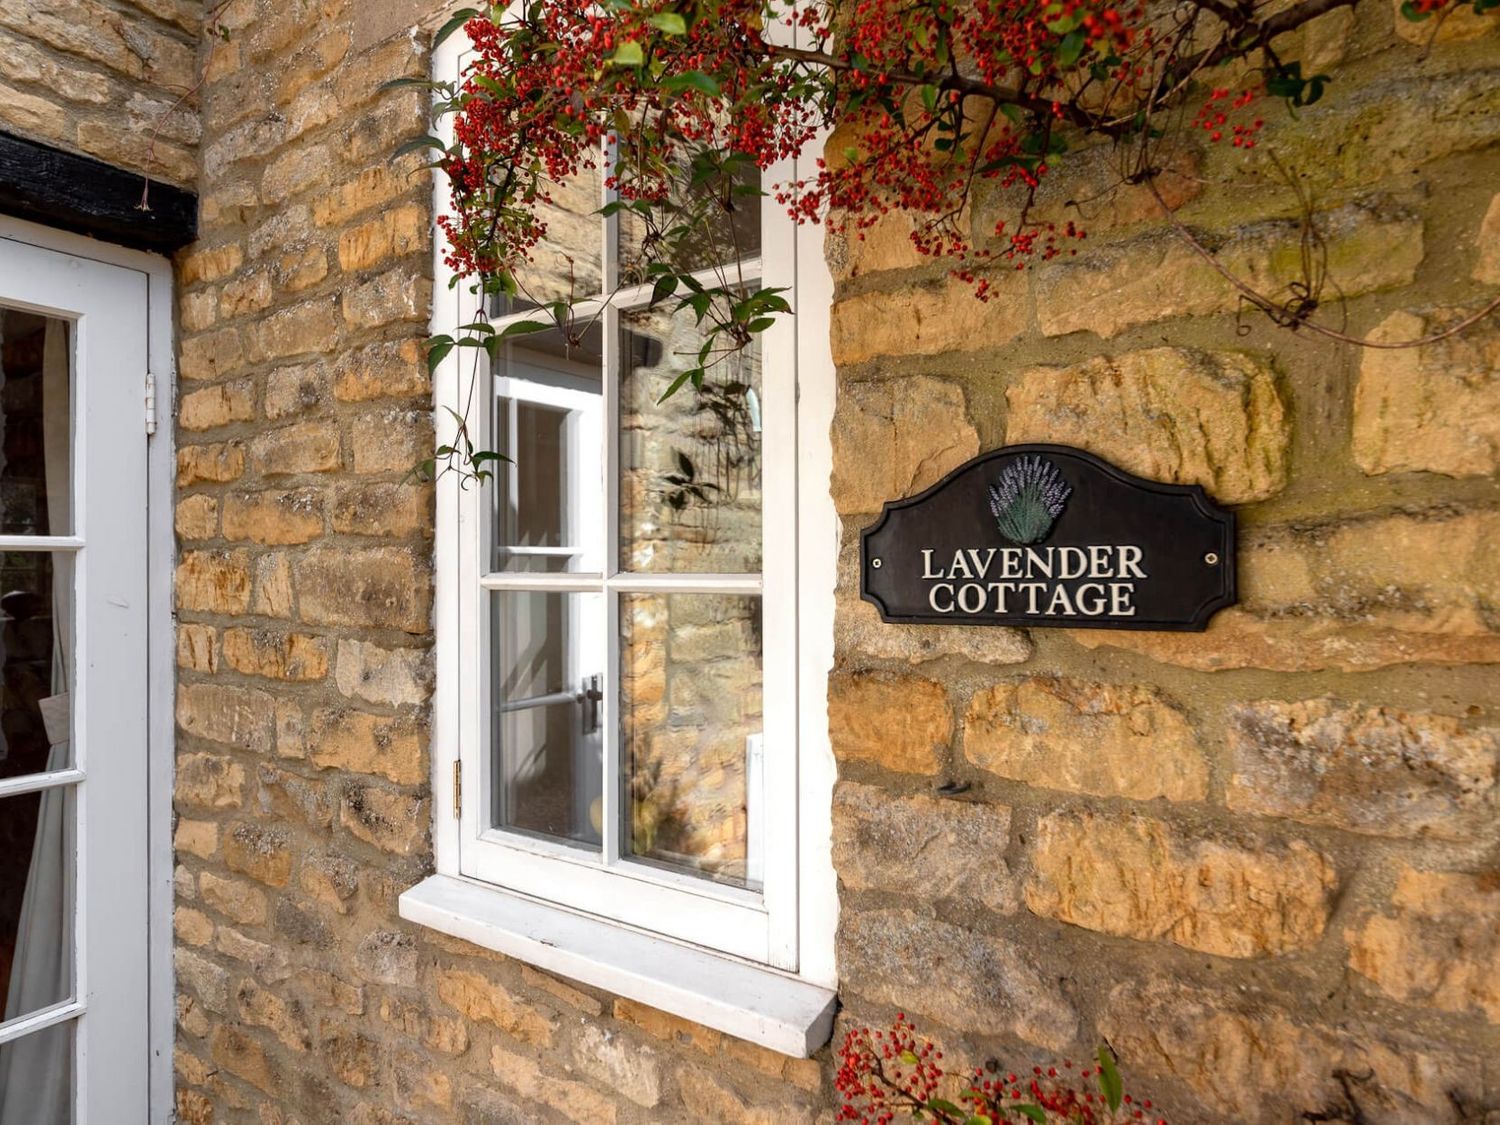 Lavender Cottage (Bourton-on-the-Water) - Cotswolds - 1091368 - photo 1